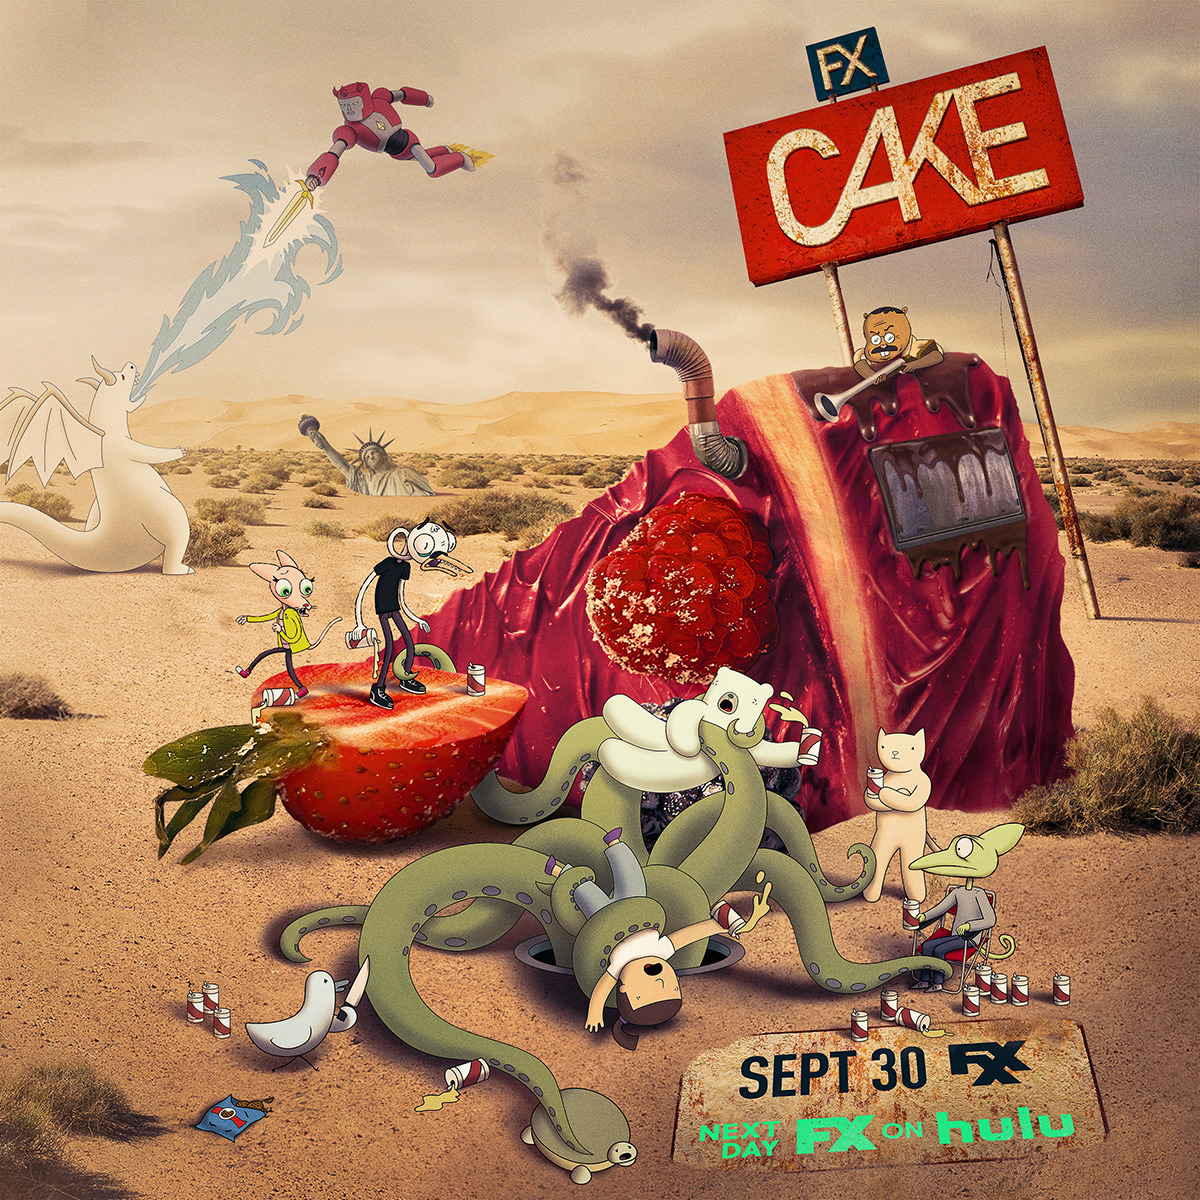 Extra Large TV Poster Image for Cake (#2 of 2)